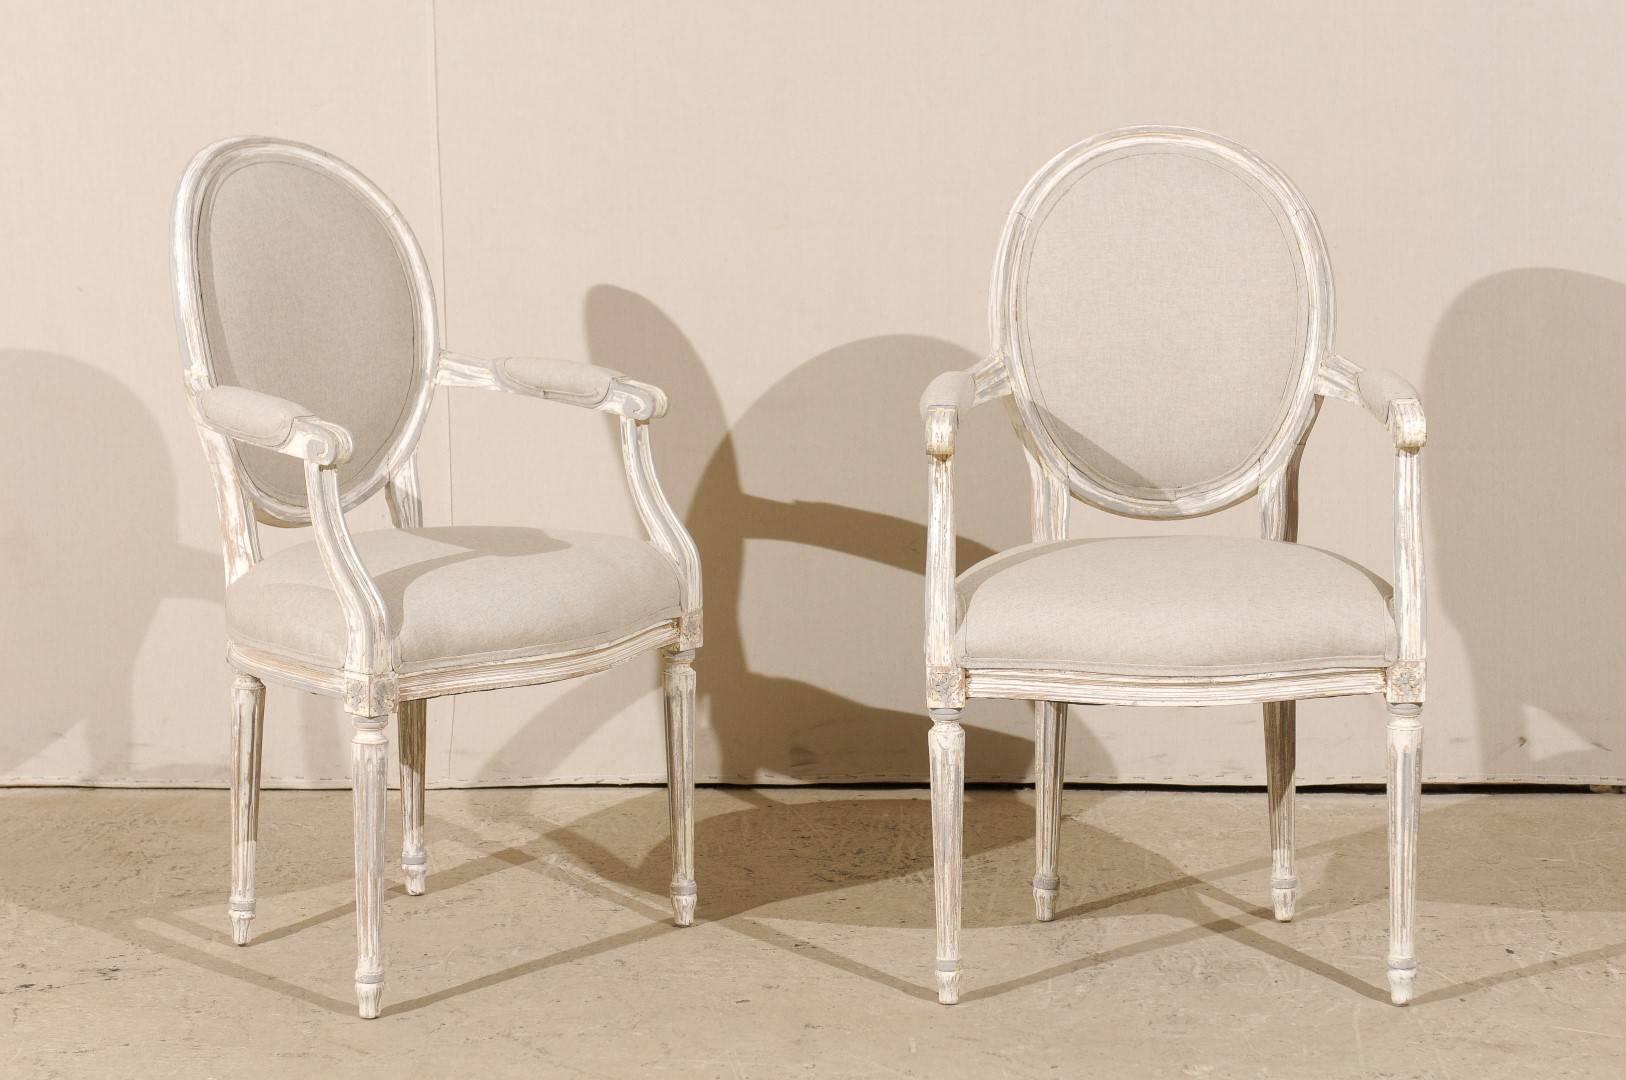 A pair of French Louis XVI style oval back painted wood upholstered accent armchairs. This pair of French chairs features oval backs, scrolled and partially upholstered arms, four fluted and tapered legs as well as rosettes on the knees, typical of